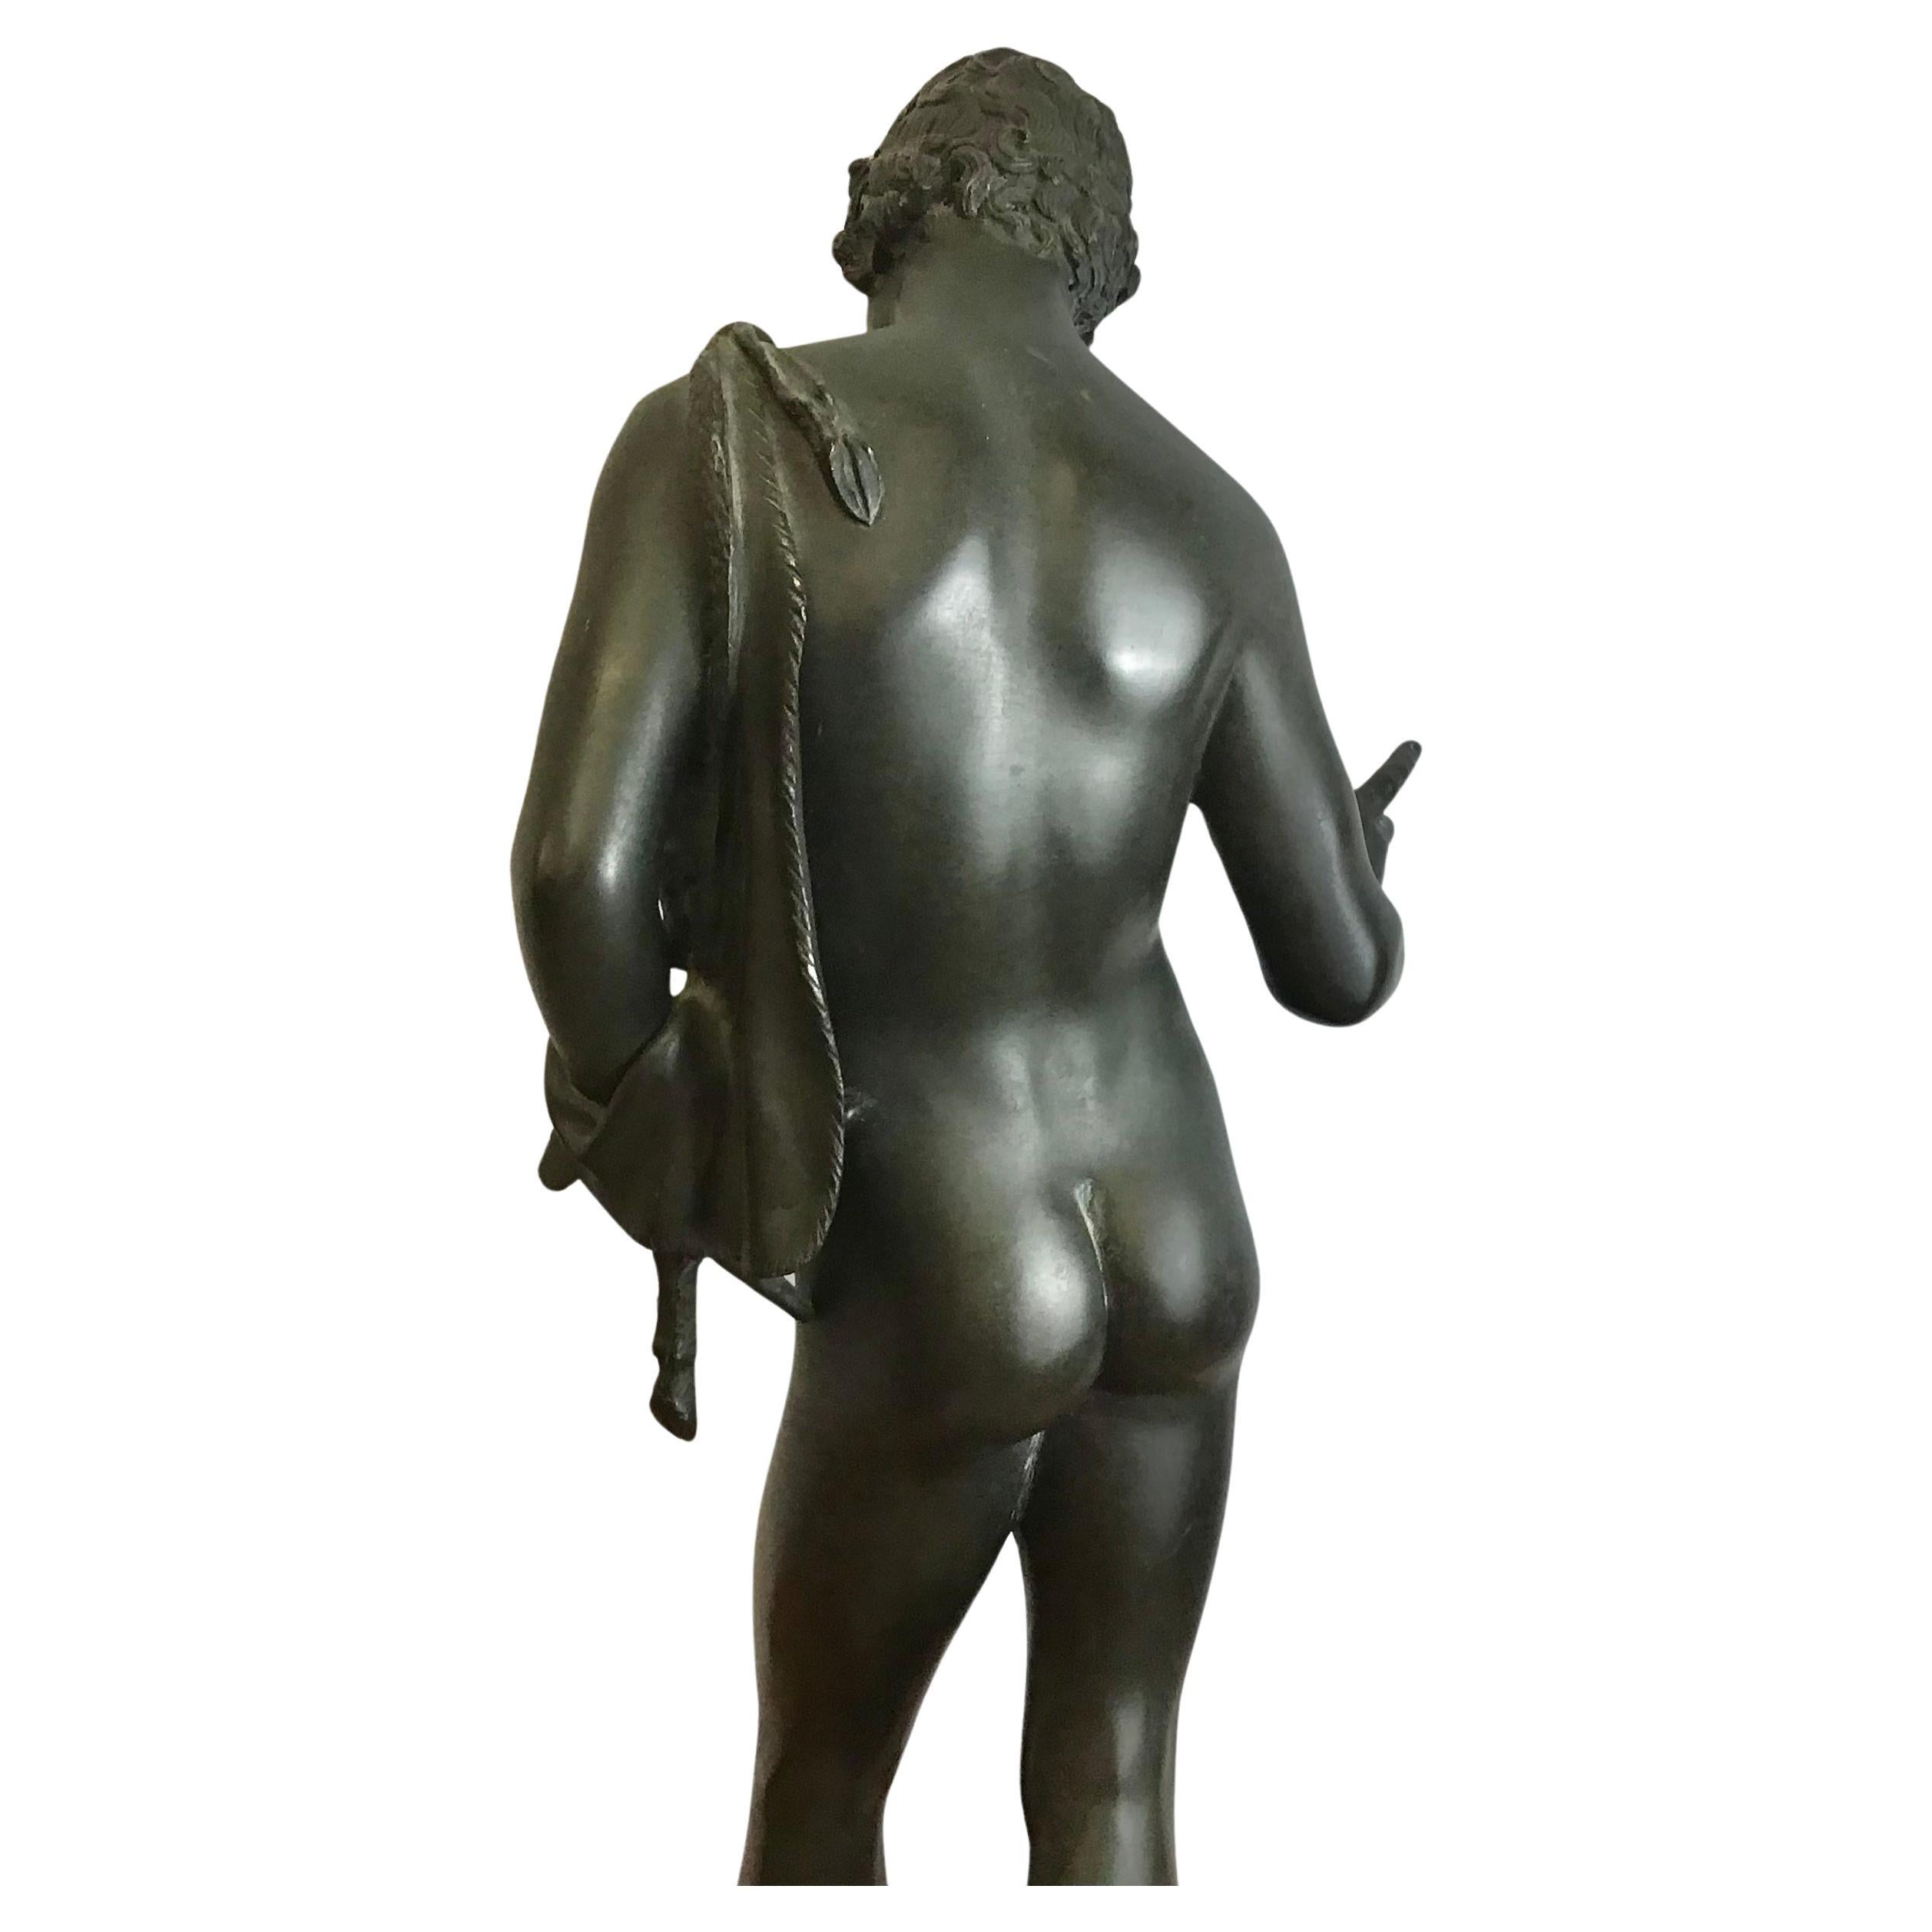 Large 19th Century Grand Tour bronze sculpture of Narcissus after the original found in 1862 at Pompeii. Signed 